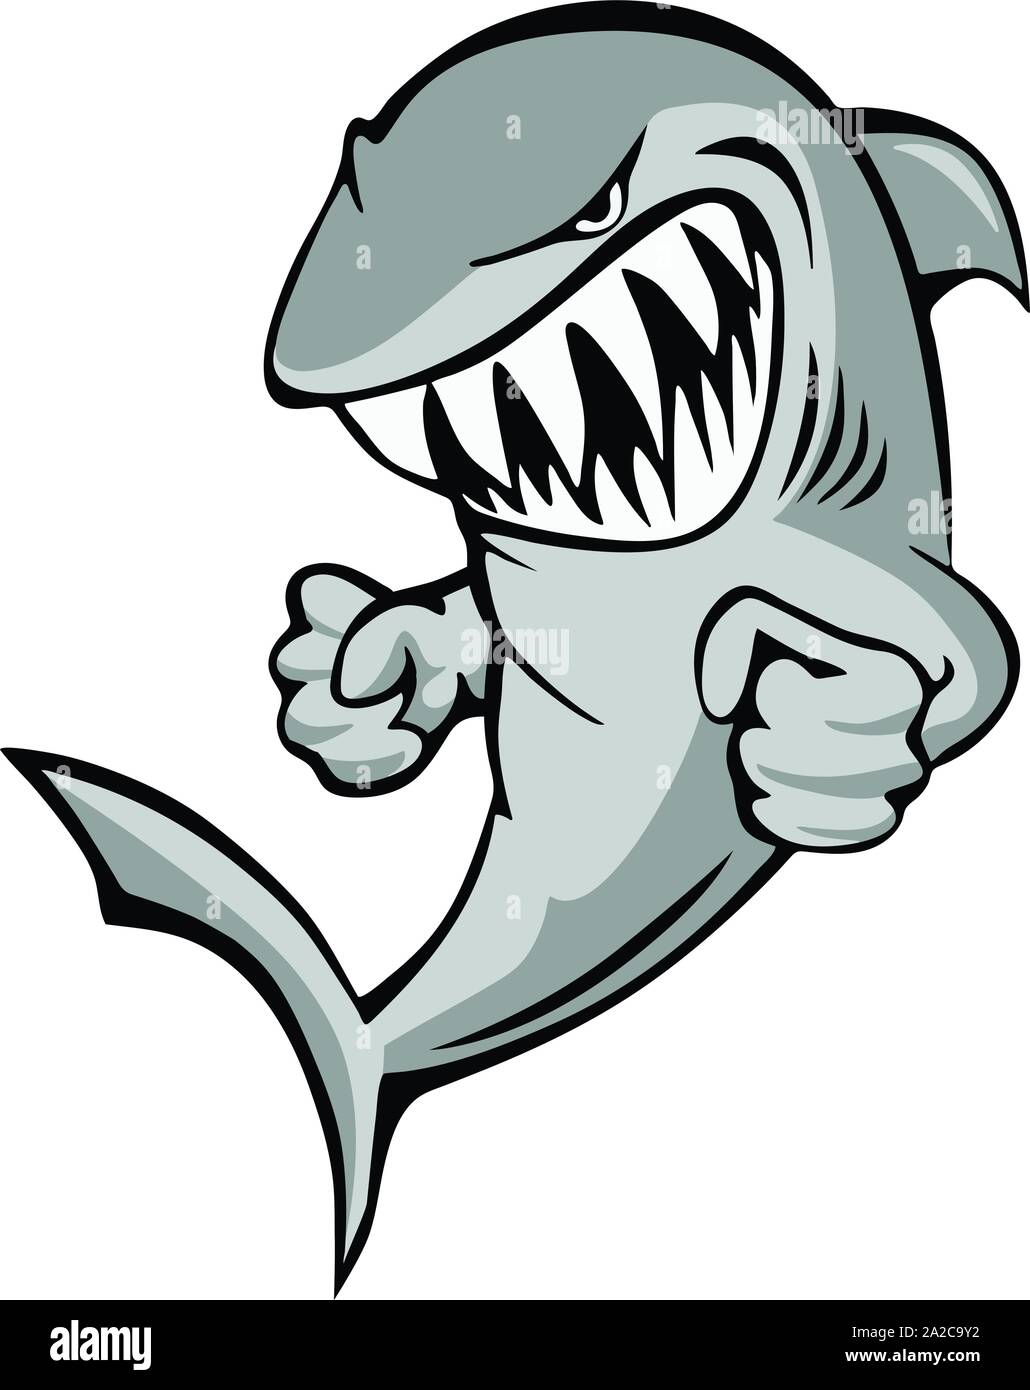 Shark Jumping with Big Grin and Fists Cartoon Isolated Vector Illustration Stock Vector